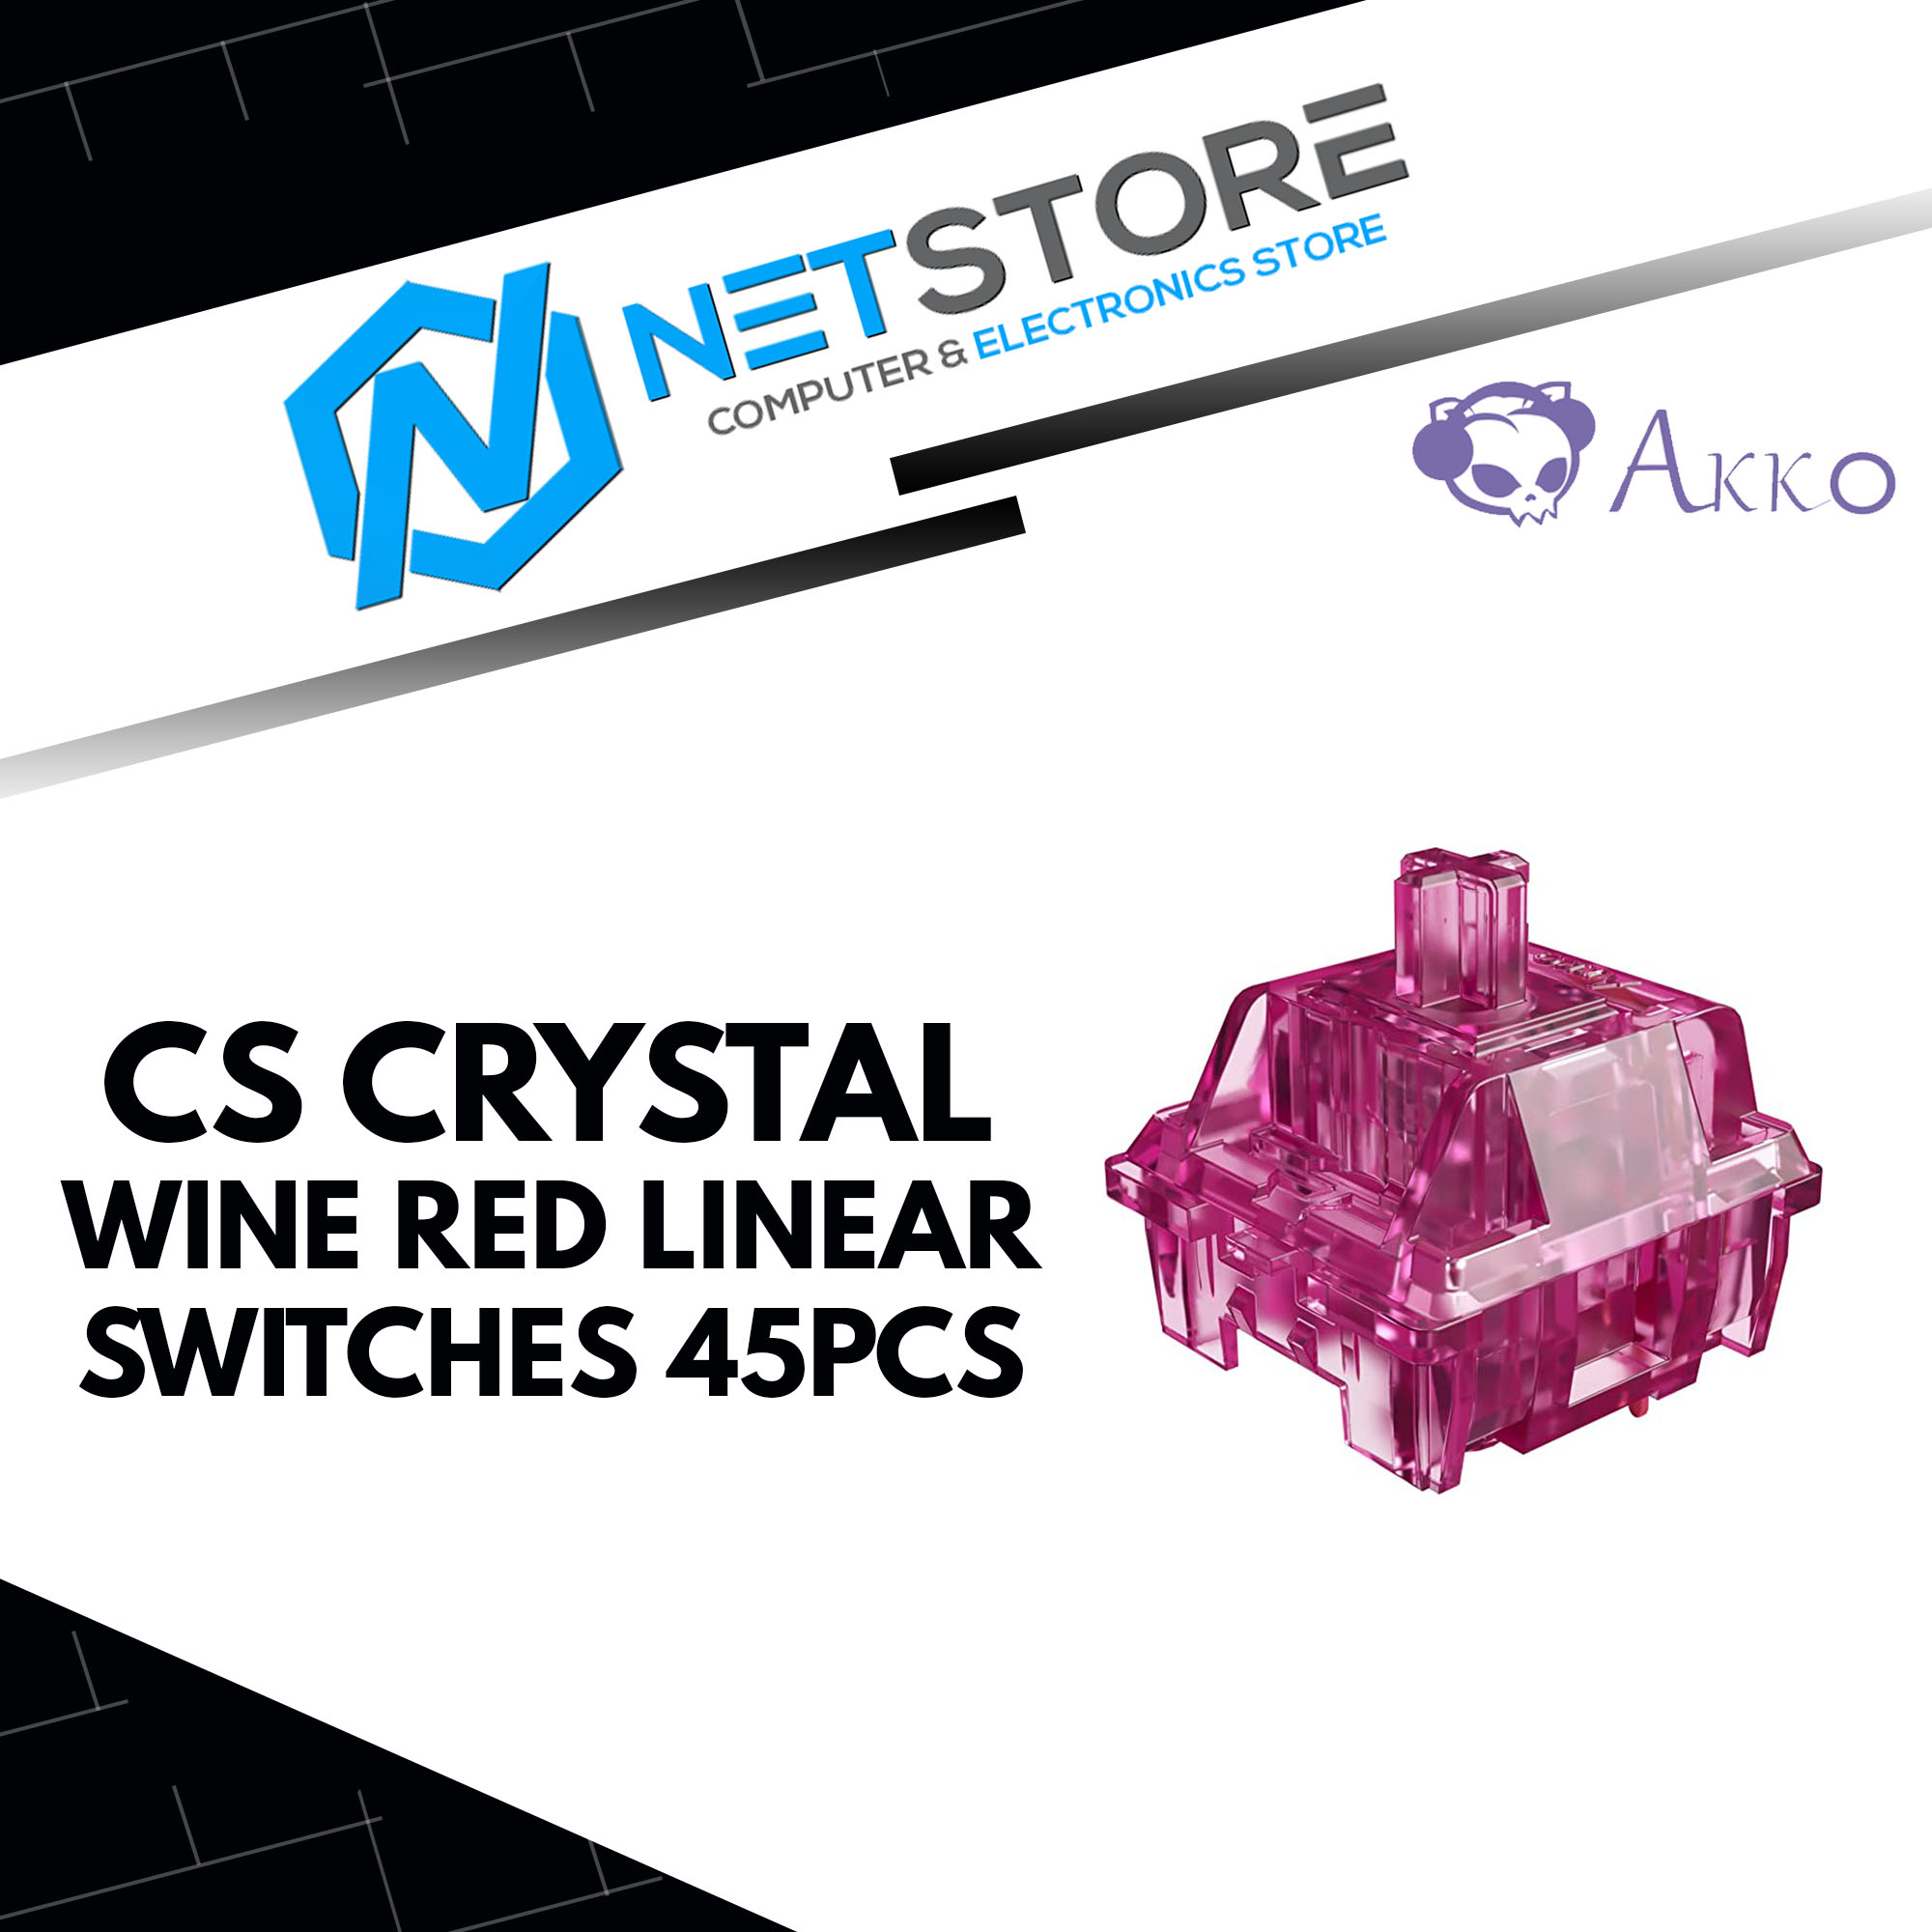 AKKO CS CRYSTAL WINE RED LINEAR SWITCHES 45PCS - 6925758621311